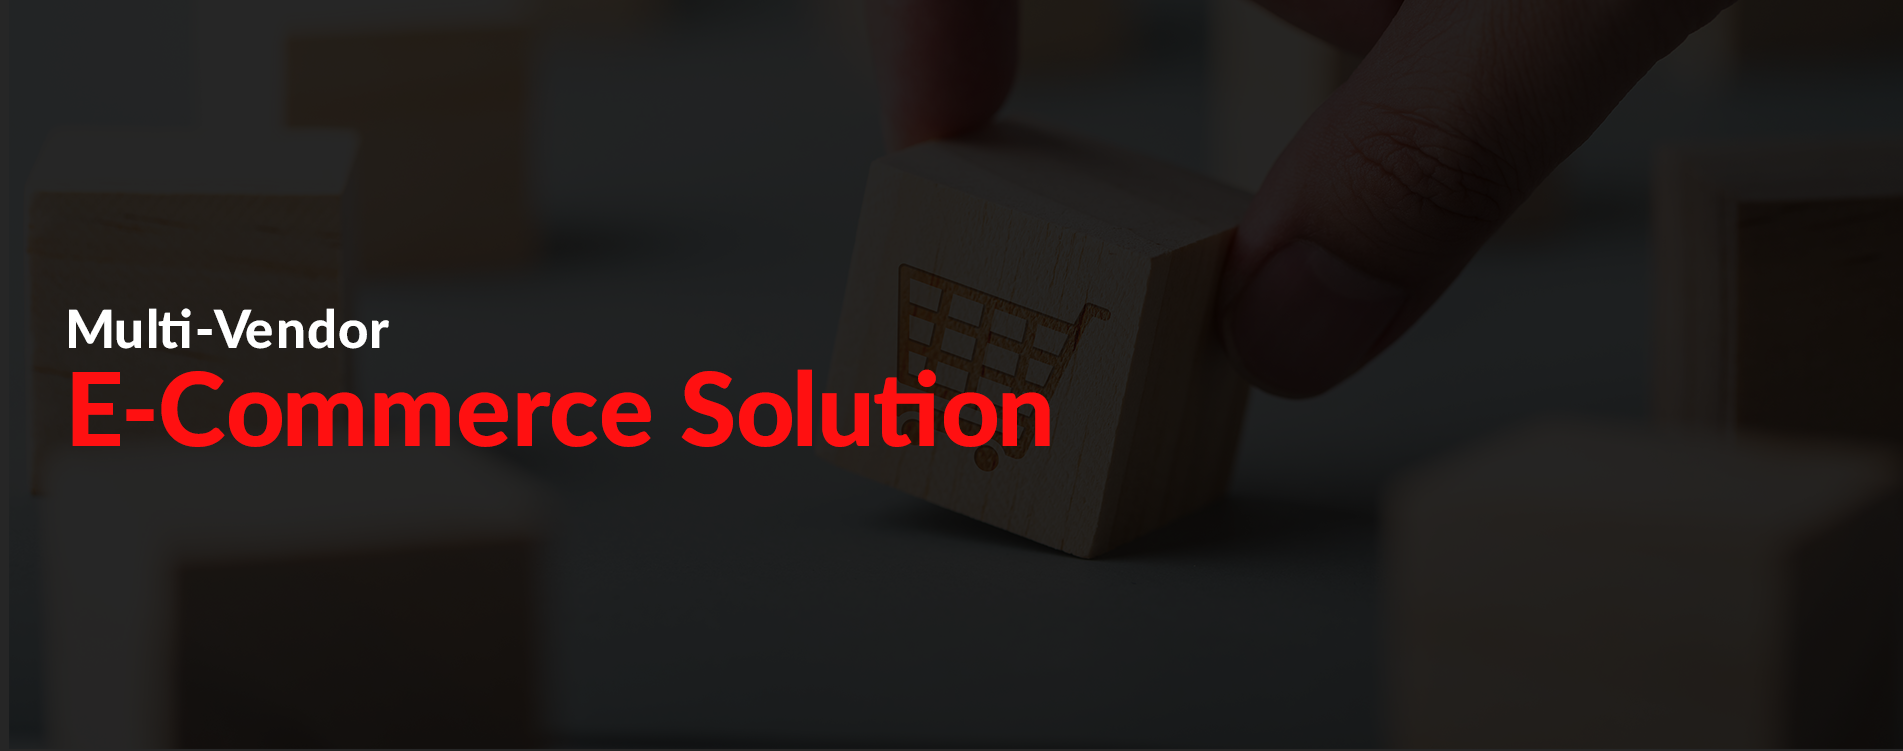 multi vendor marketplace solutions for business